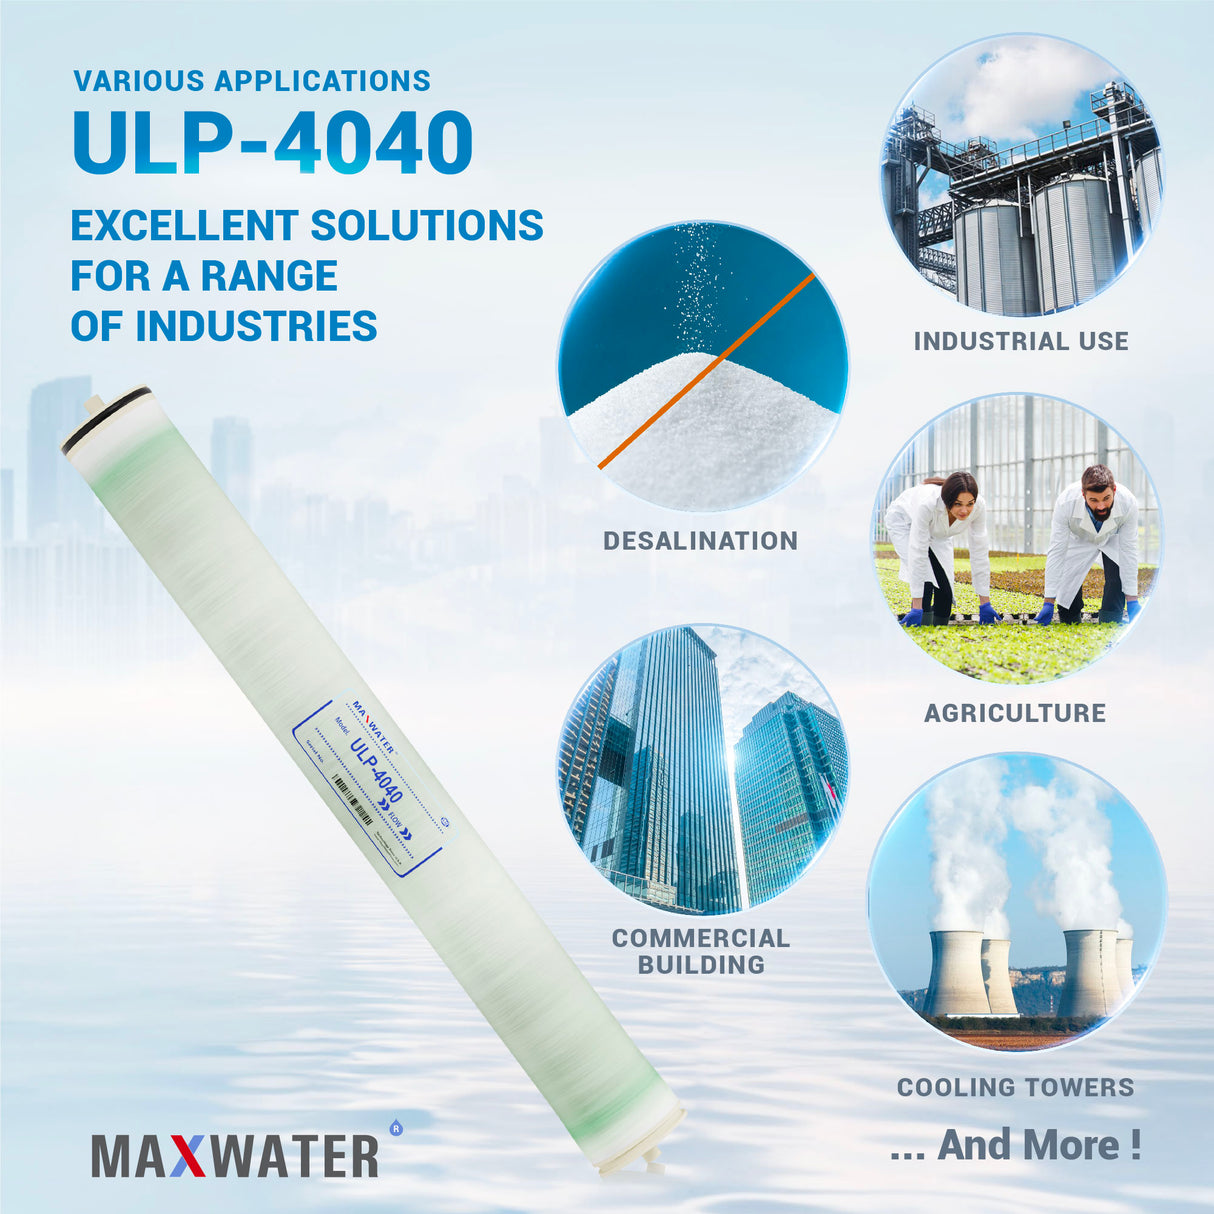 Reliable 4x40-inch RO membrane for ultra low-pressure setups - superior ULP filtration technology